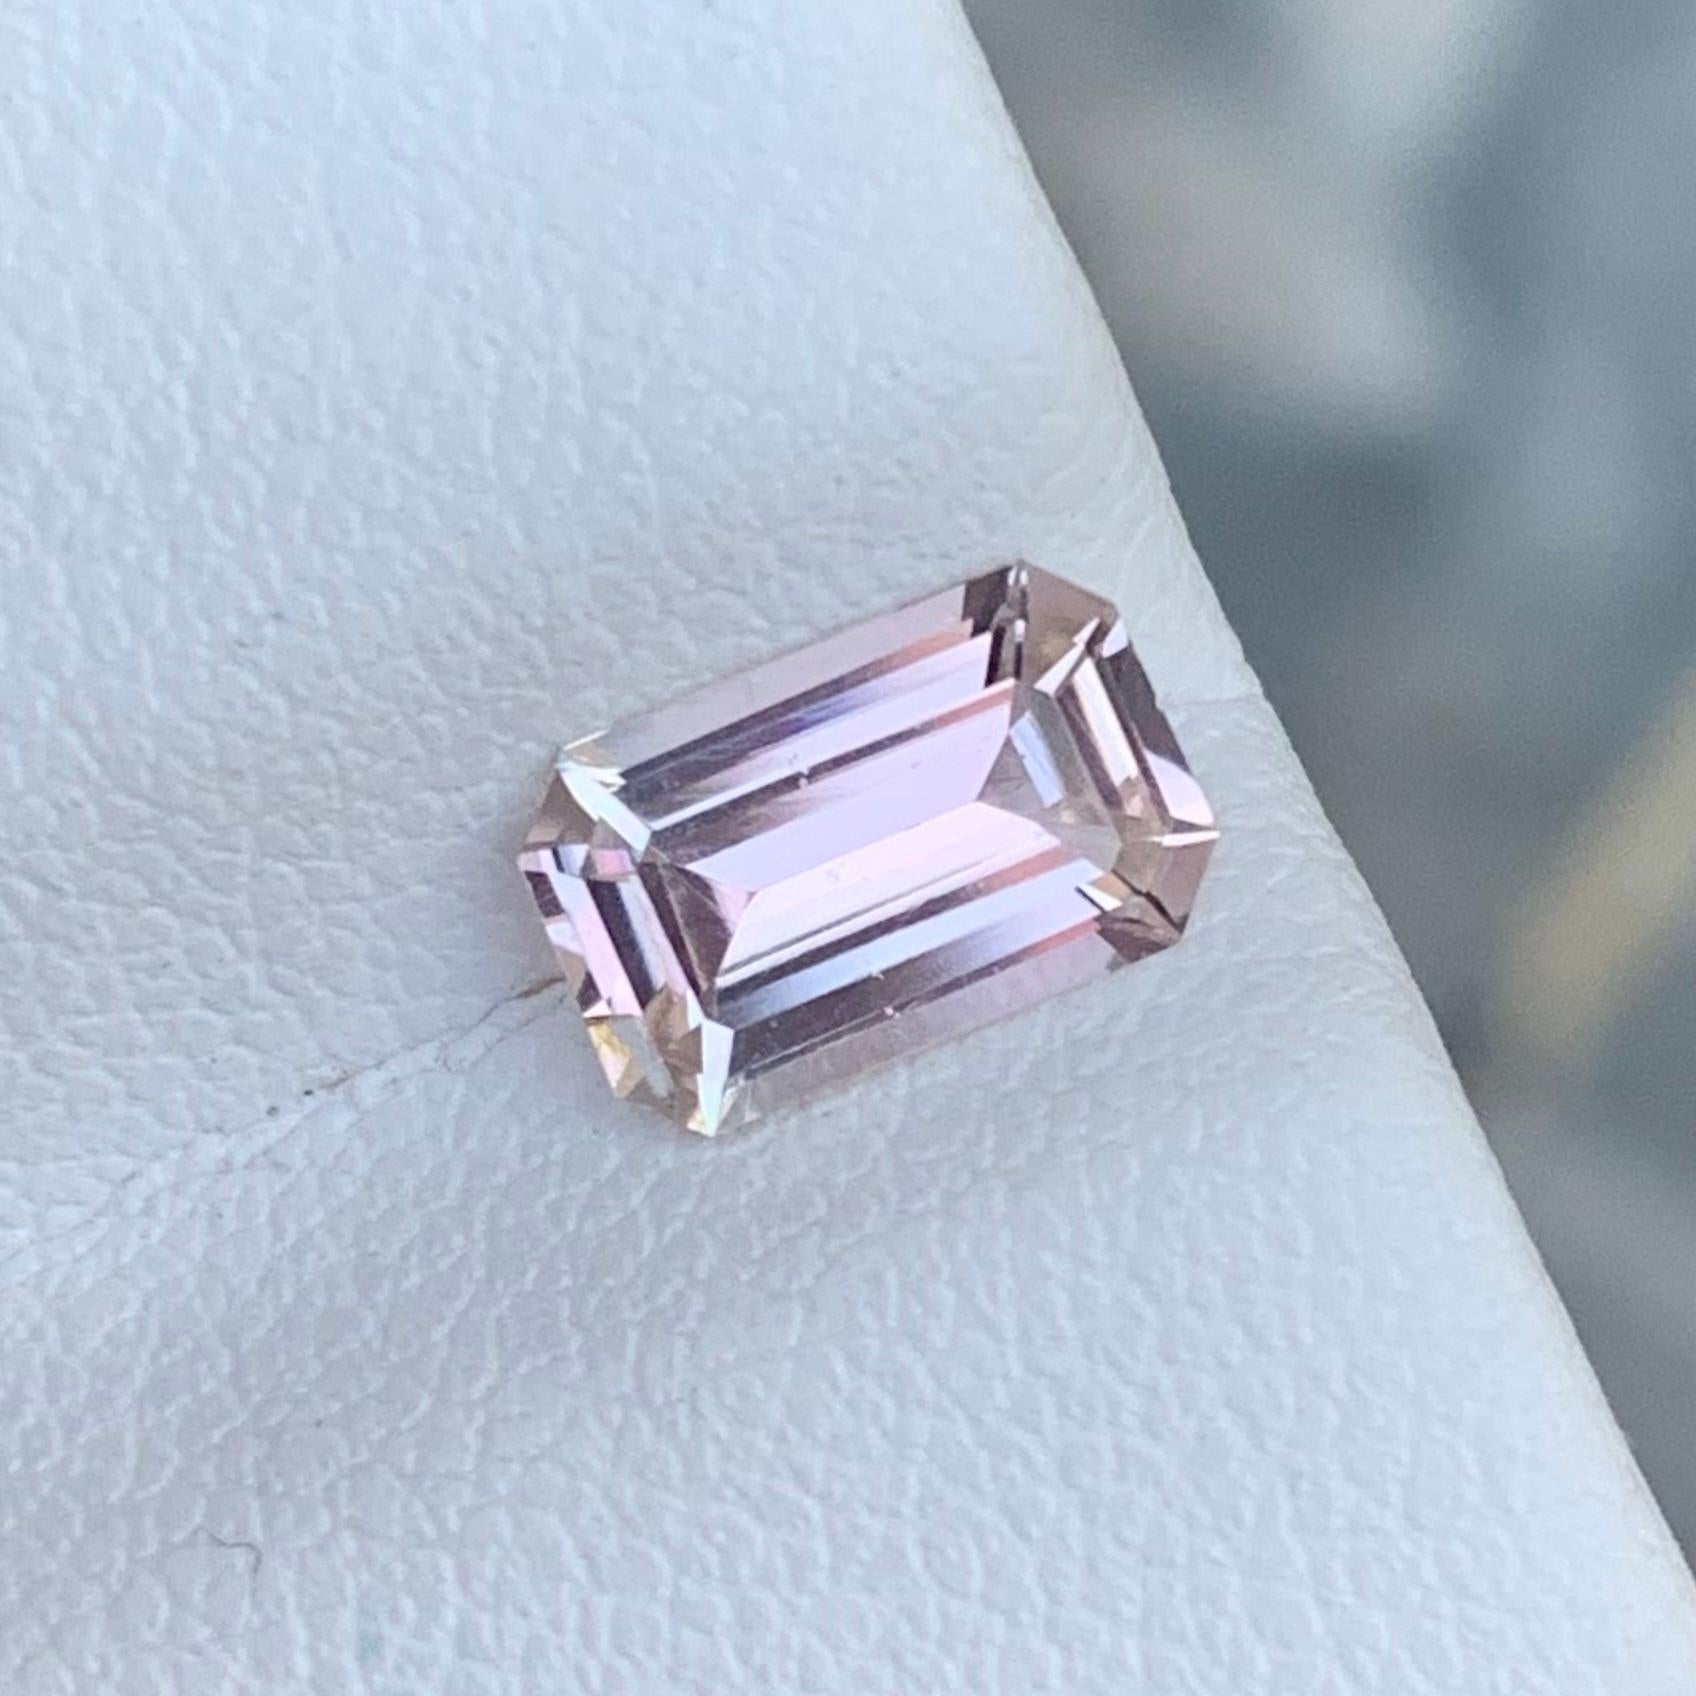 Faceted Tourmaline 
Weight: 1.10 Carats 
Dimension: 8.1x5.2x3.3 Mm
Origin: Afghanistan 
Color: Pale Pink
Shape: Emerald 
Clarity: Eye Clean
Certificate: On Demand 
With a rating between 7 and 7.5 on the Mohs scale of mineral hardness, tourmaline